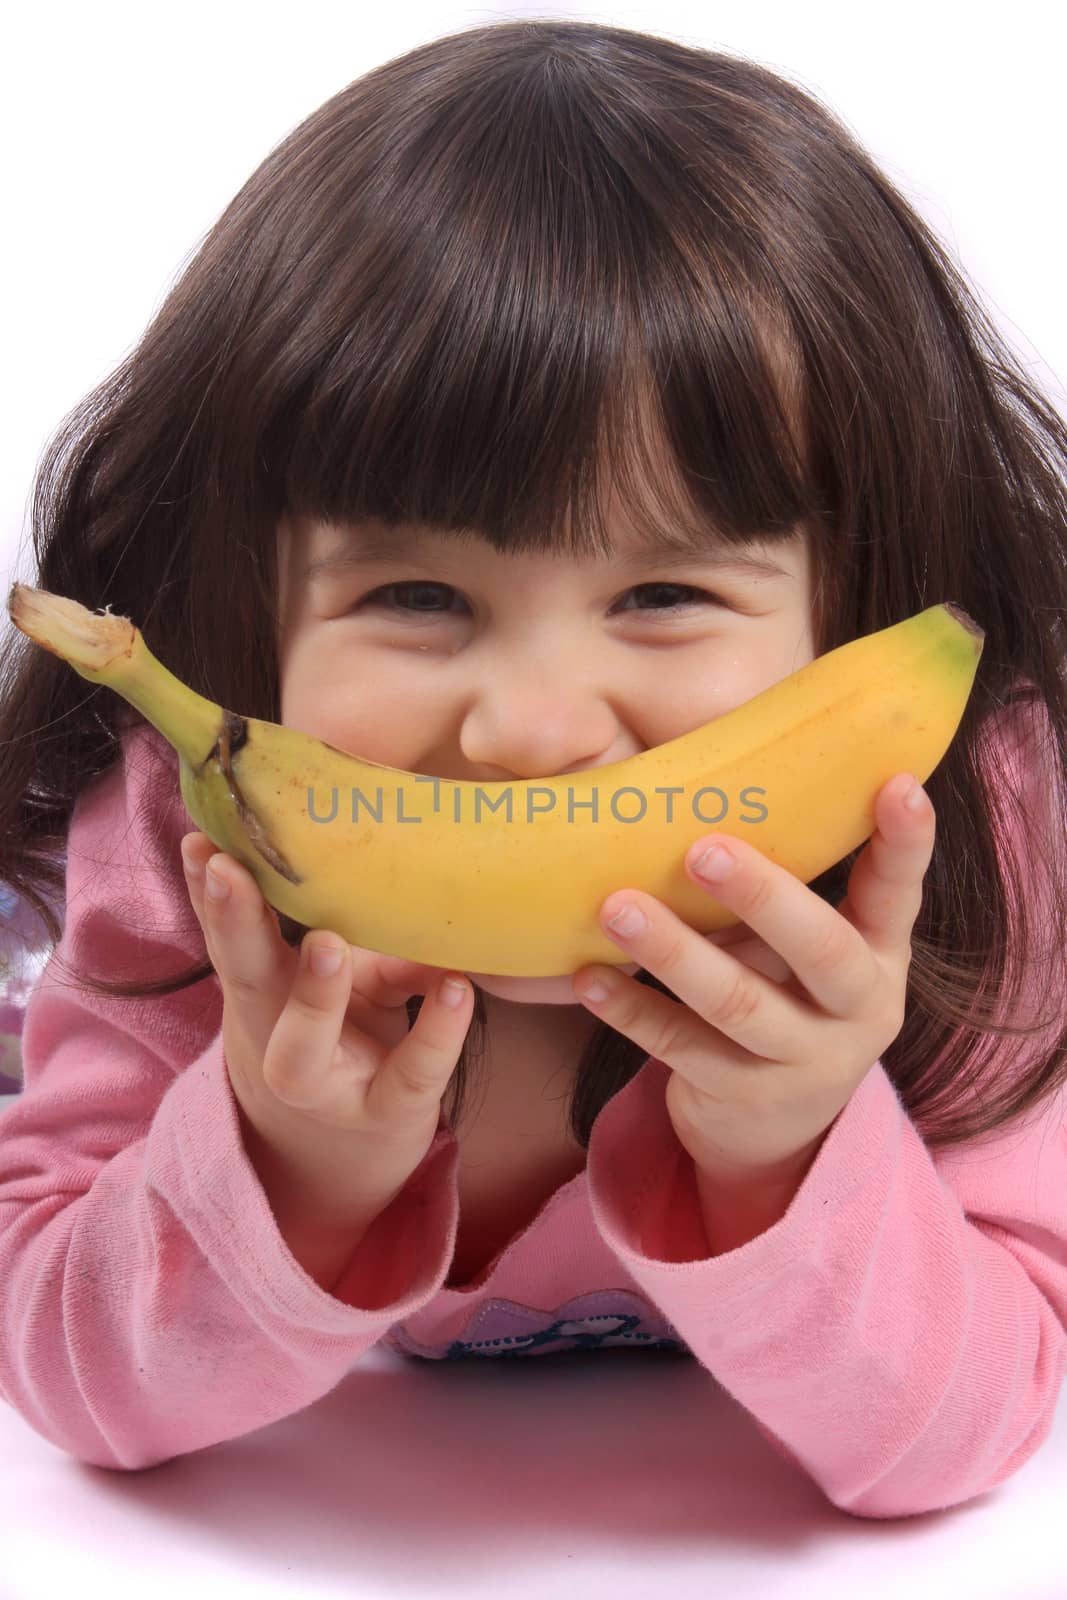 Young little girl making a funny face with a banana as her smile